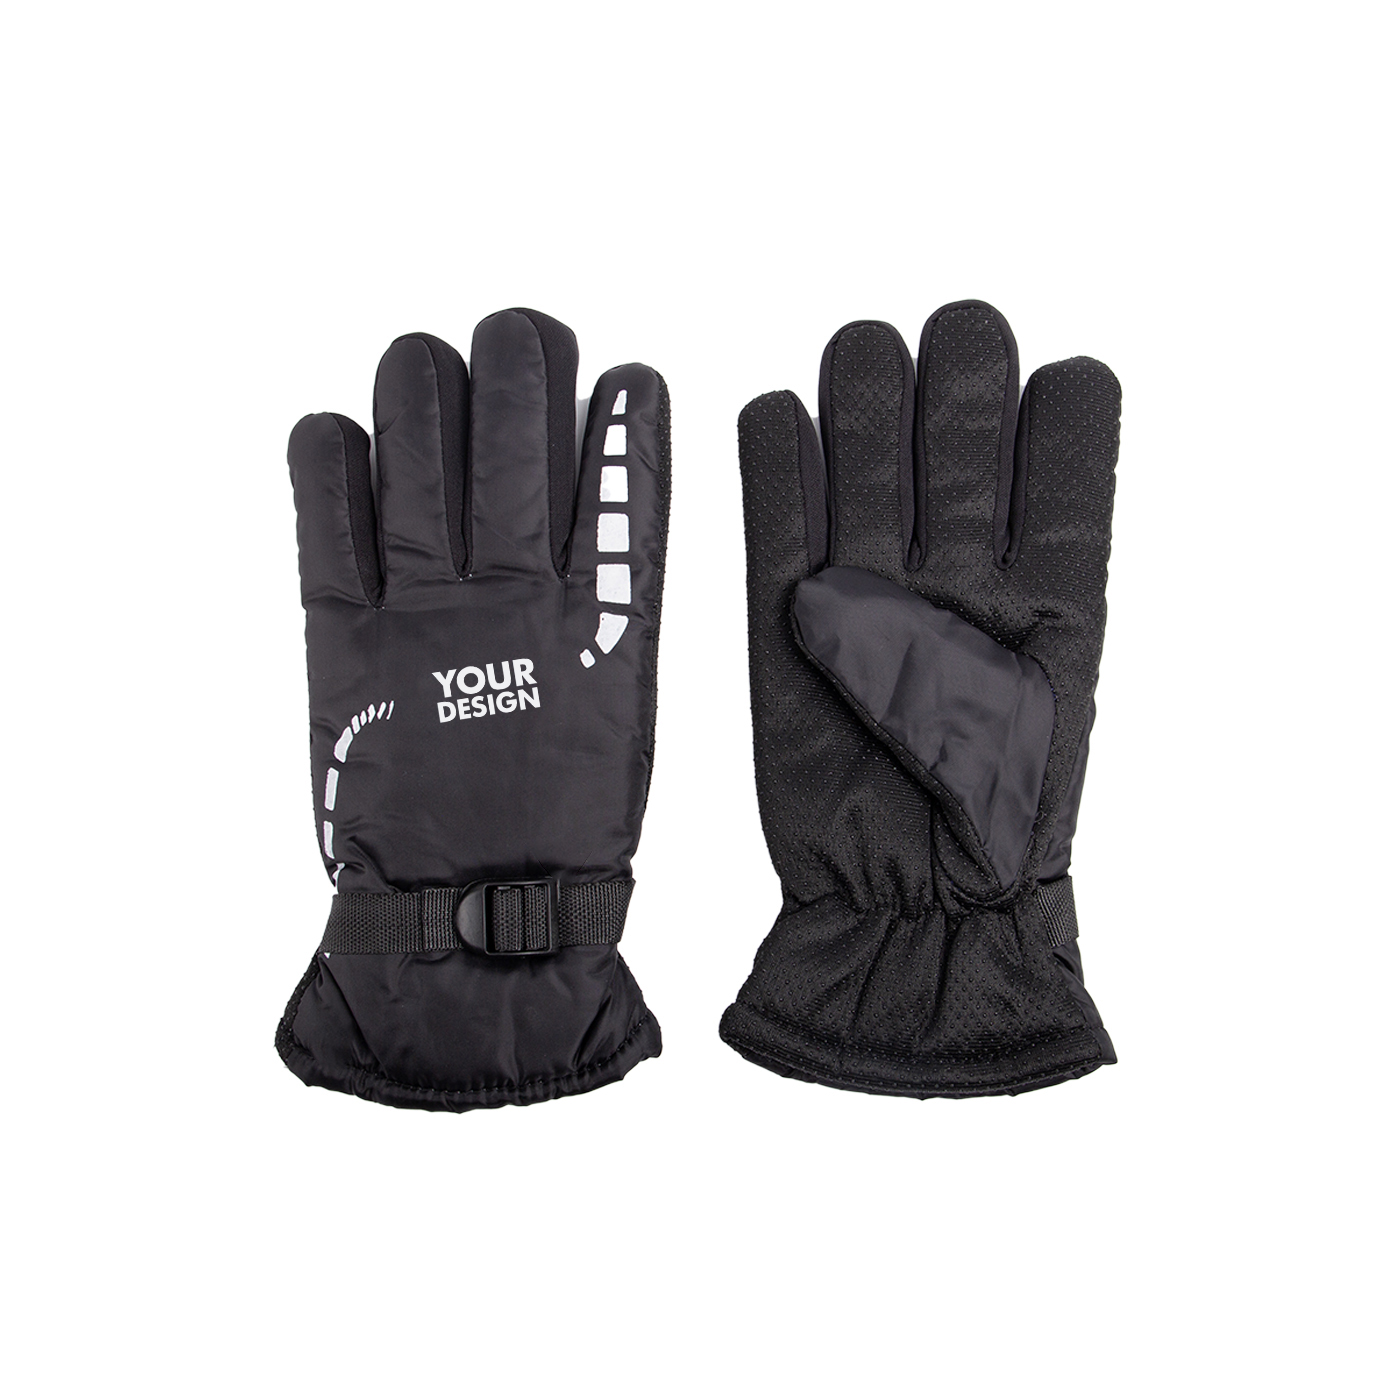 Outdoor Sports Windproof Warm Gloves1